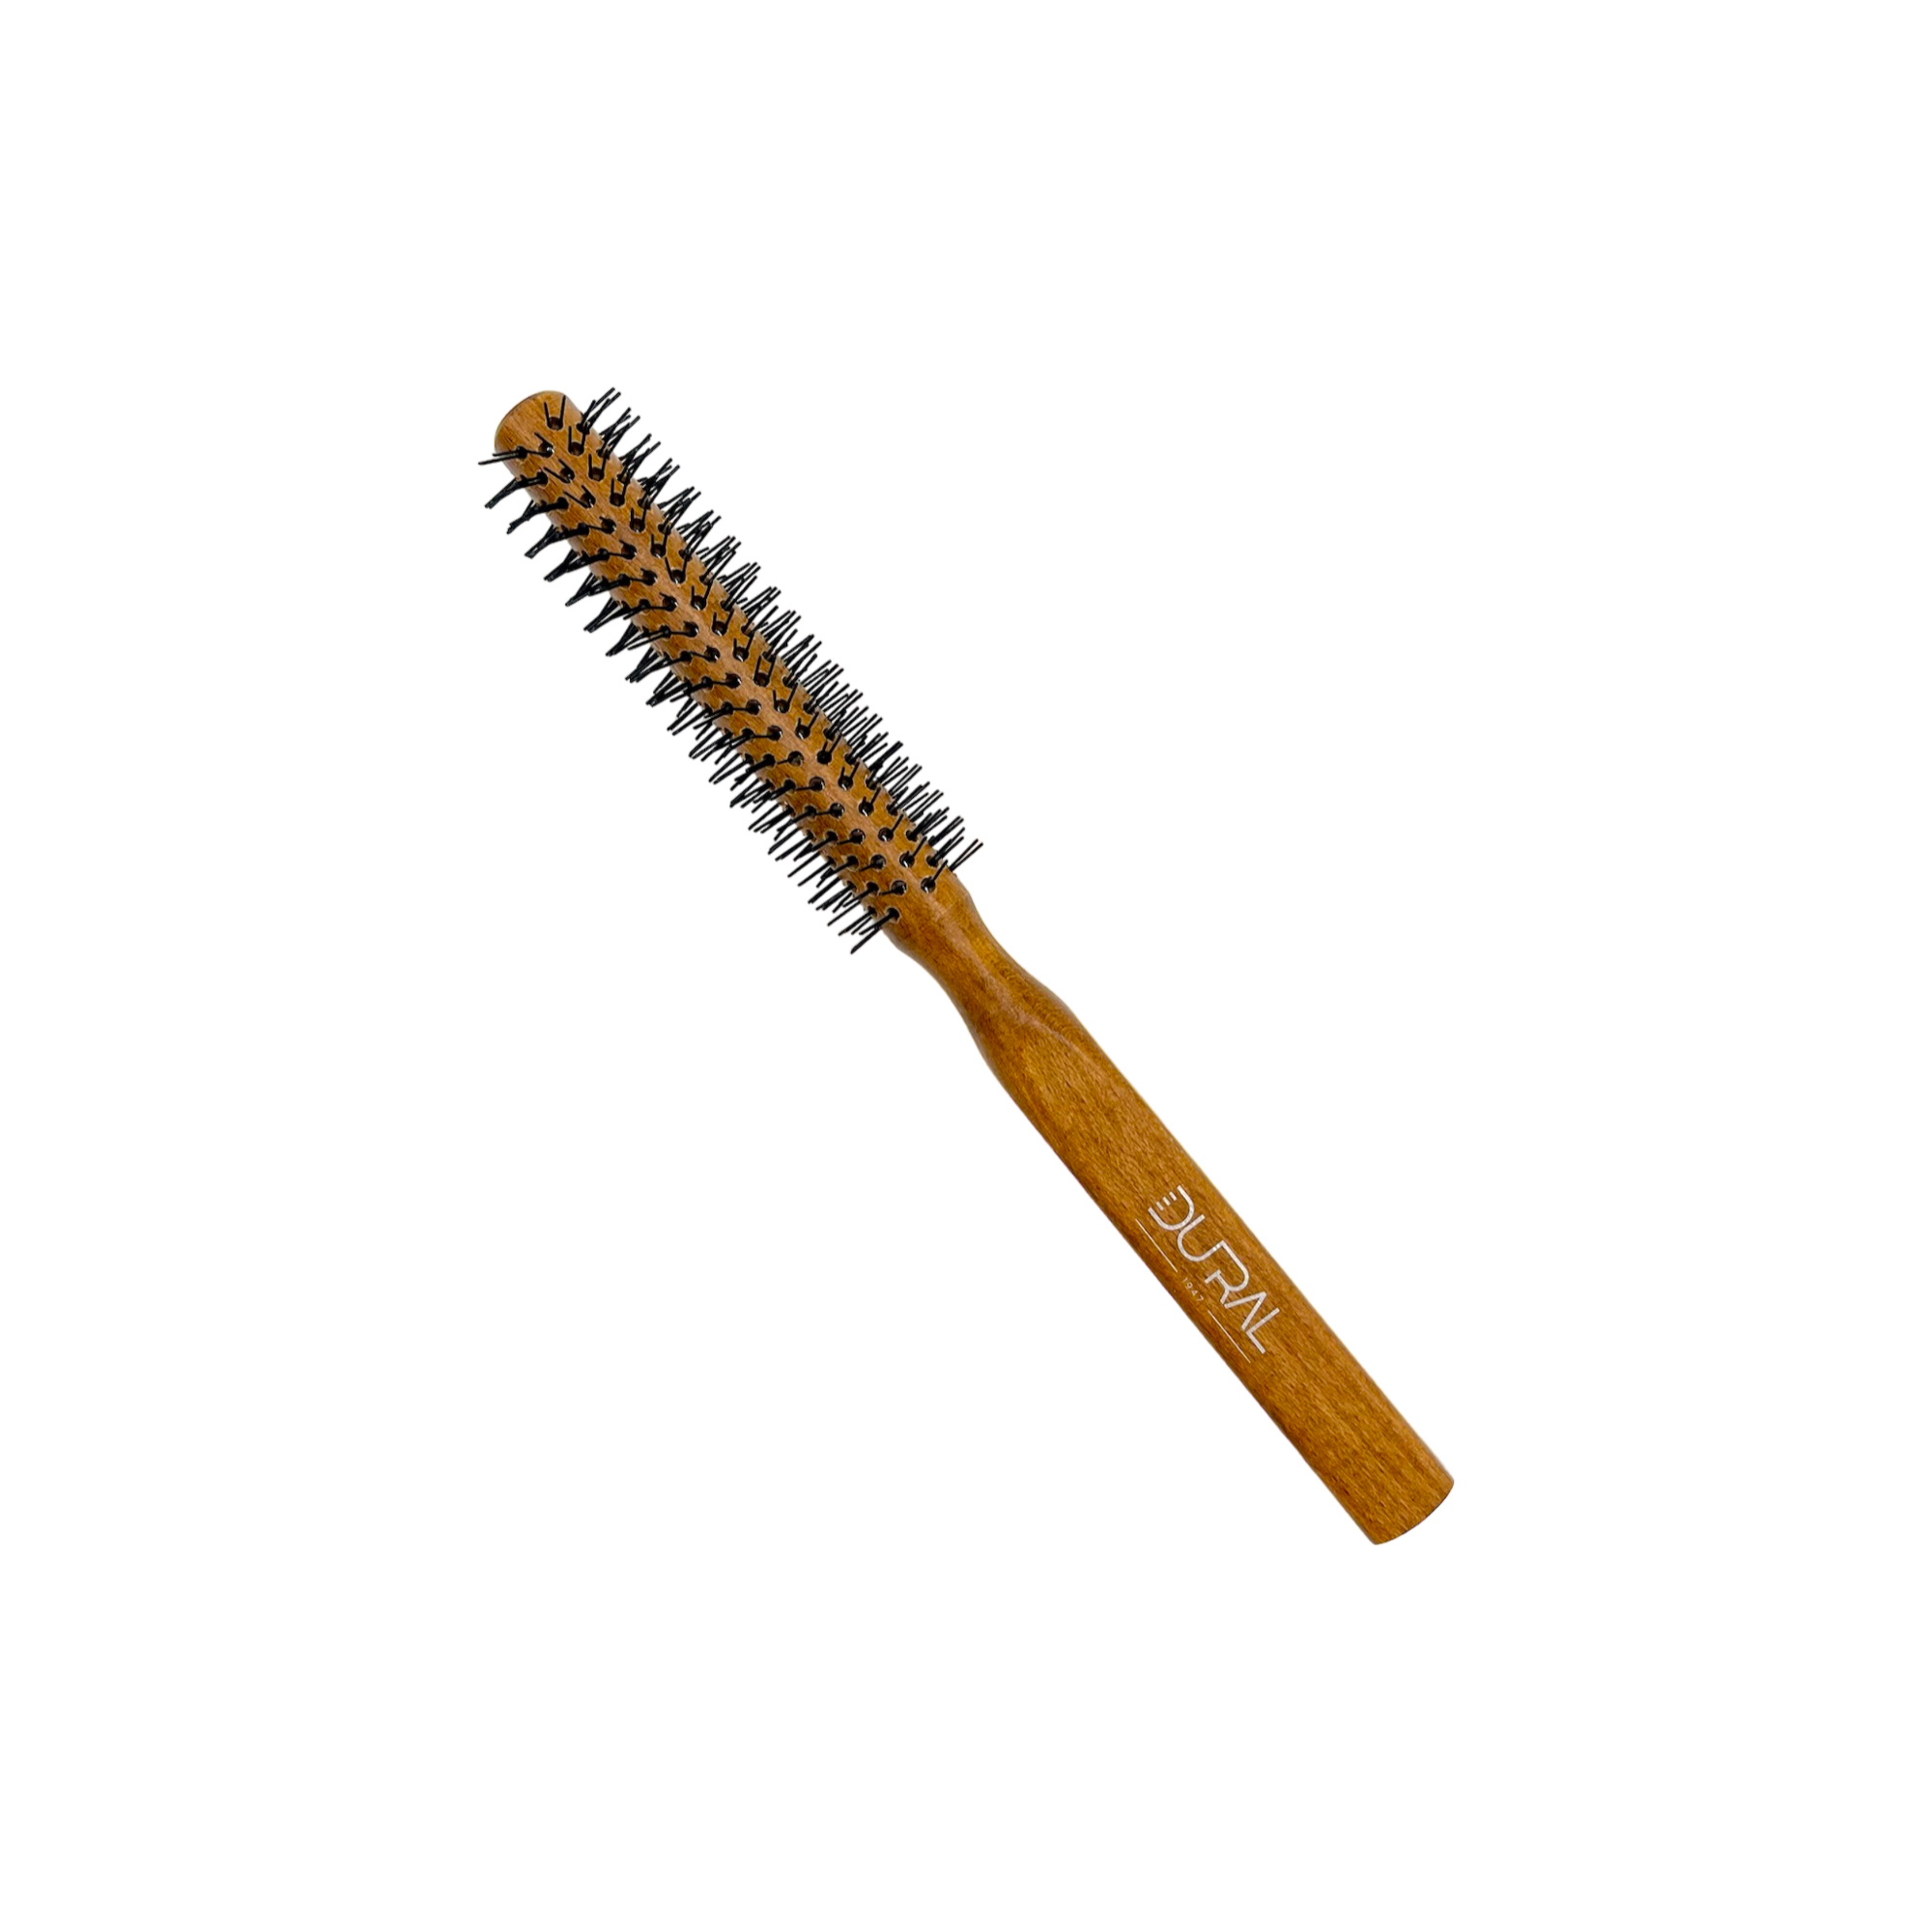 Dural Beech wood round-styler hair brush with nylon pins - 12 rows